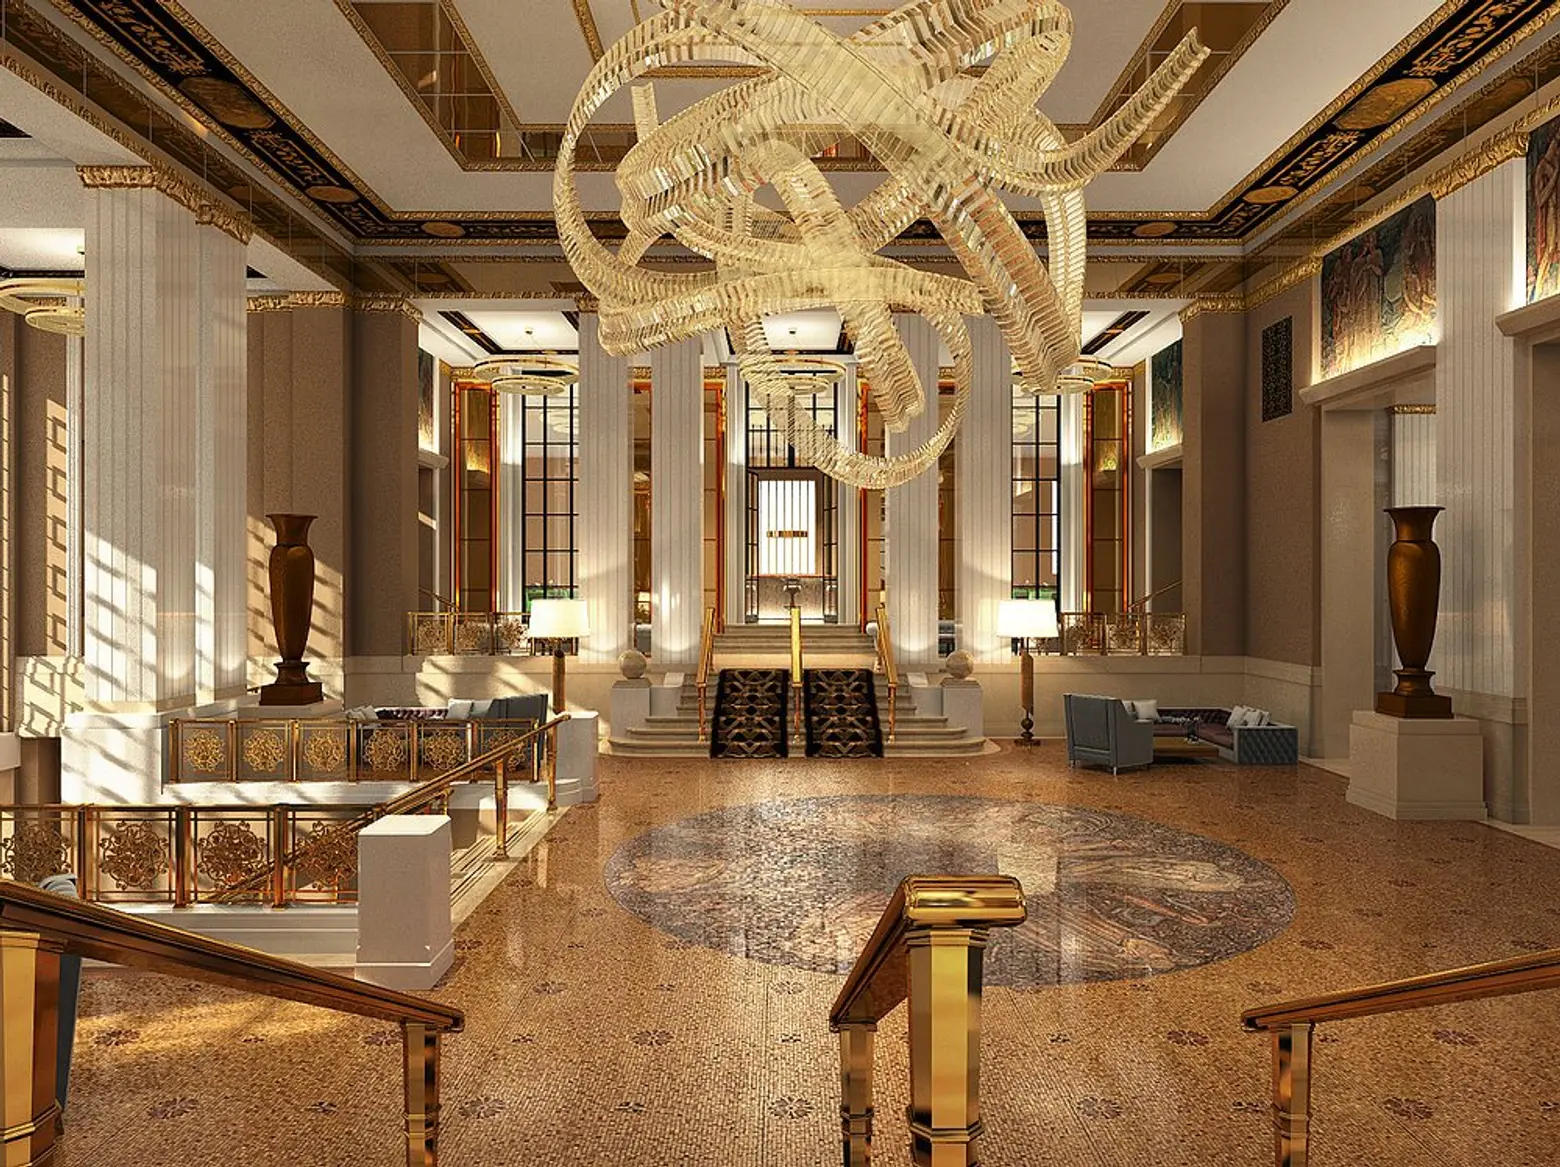 Designers at ArX Solutions offer their own take on a Waldorf Astoria interior renovation